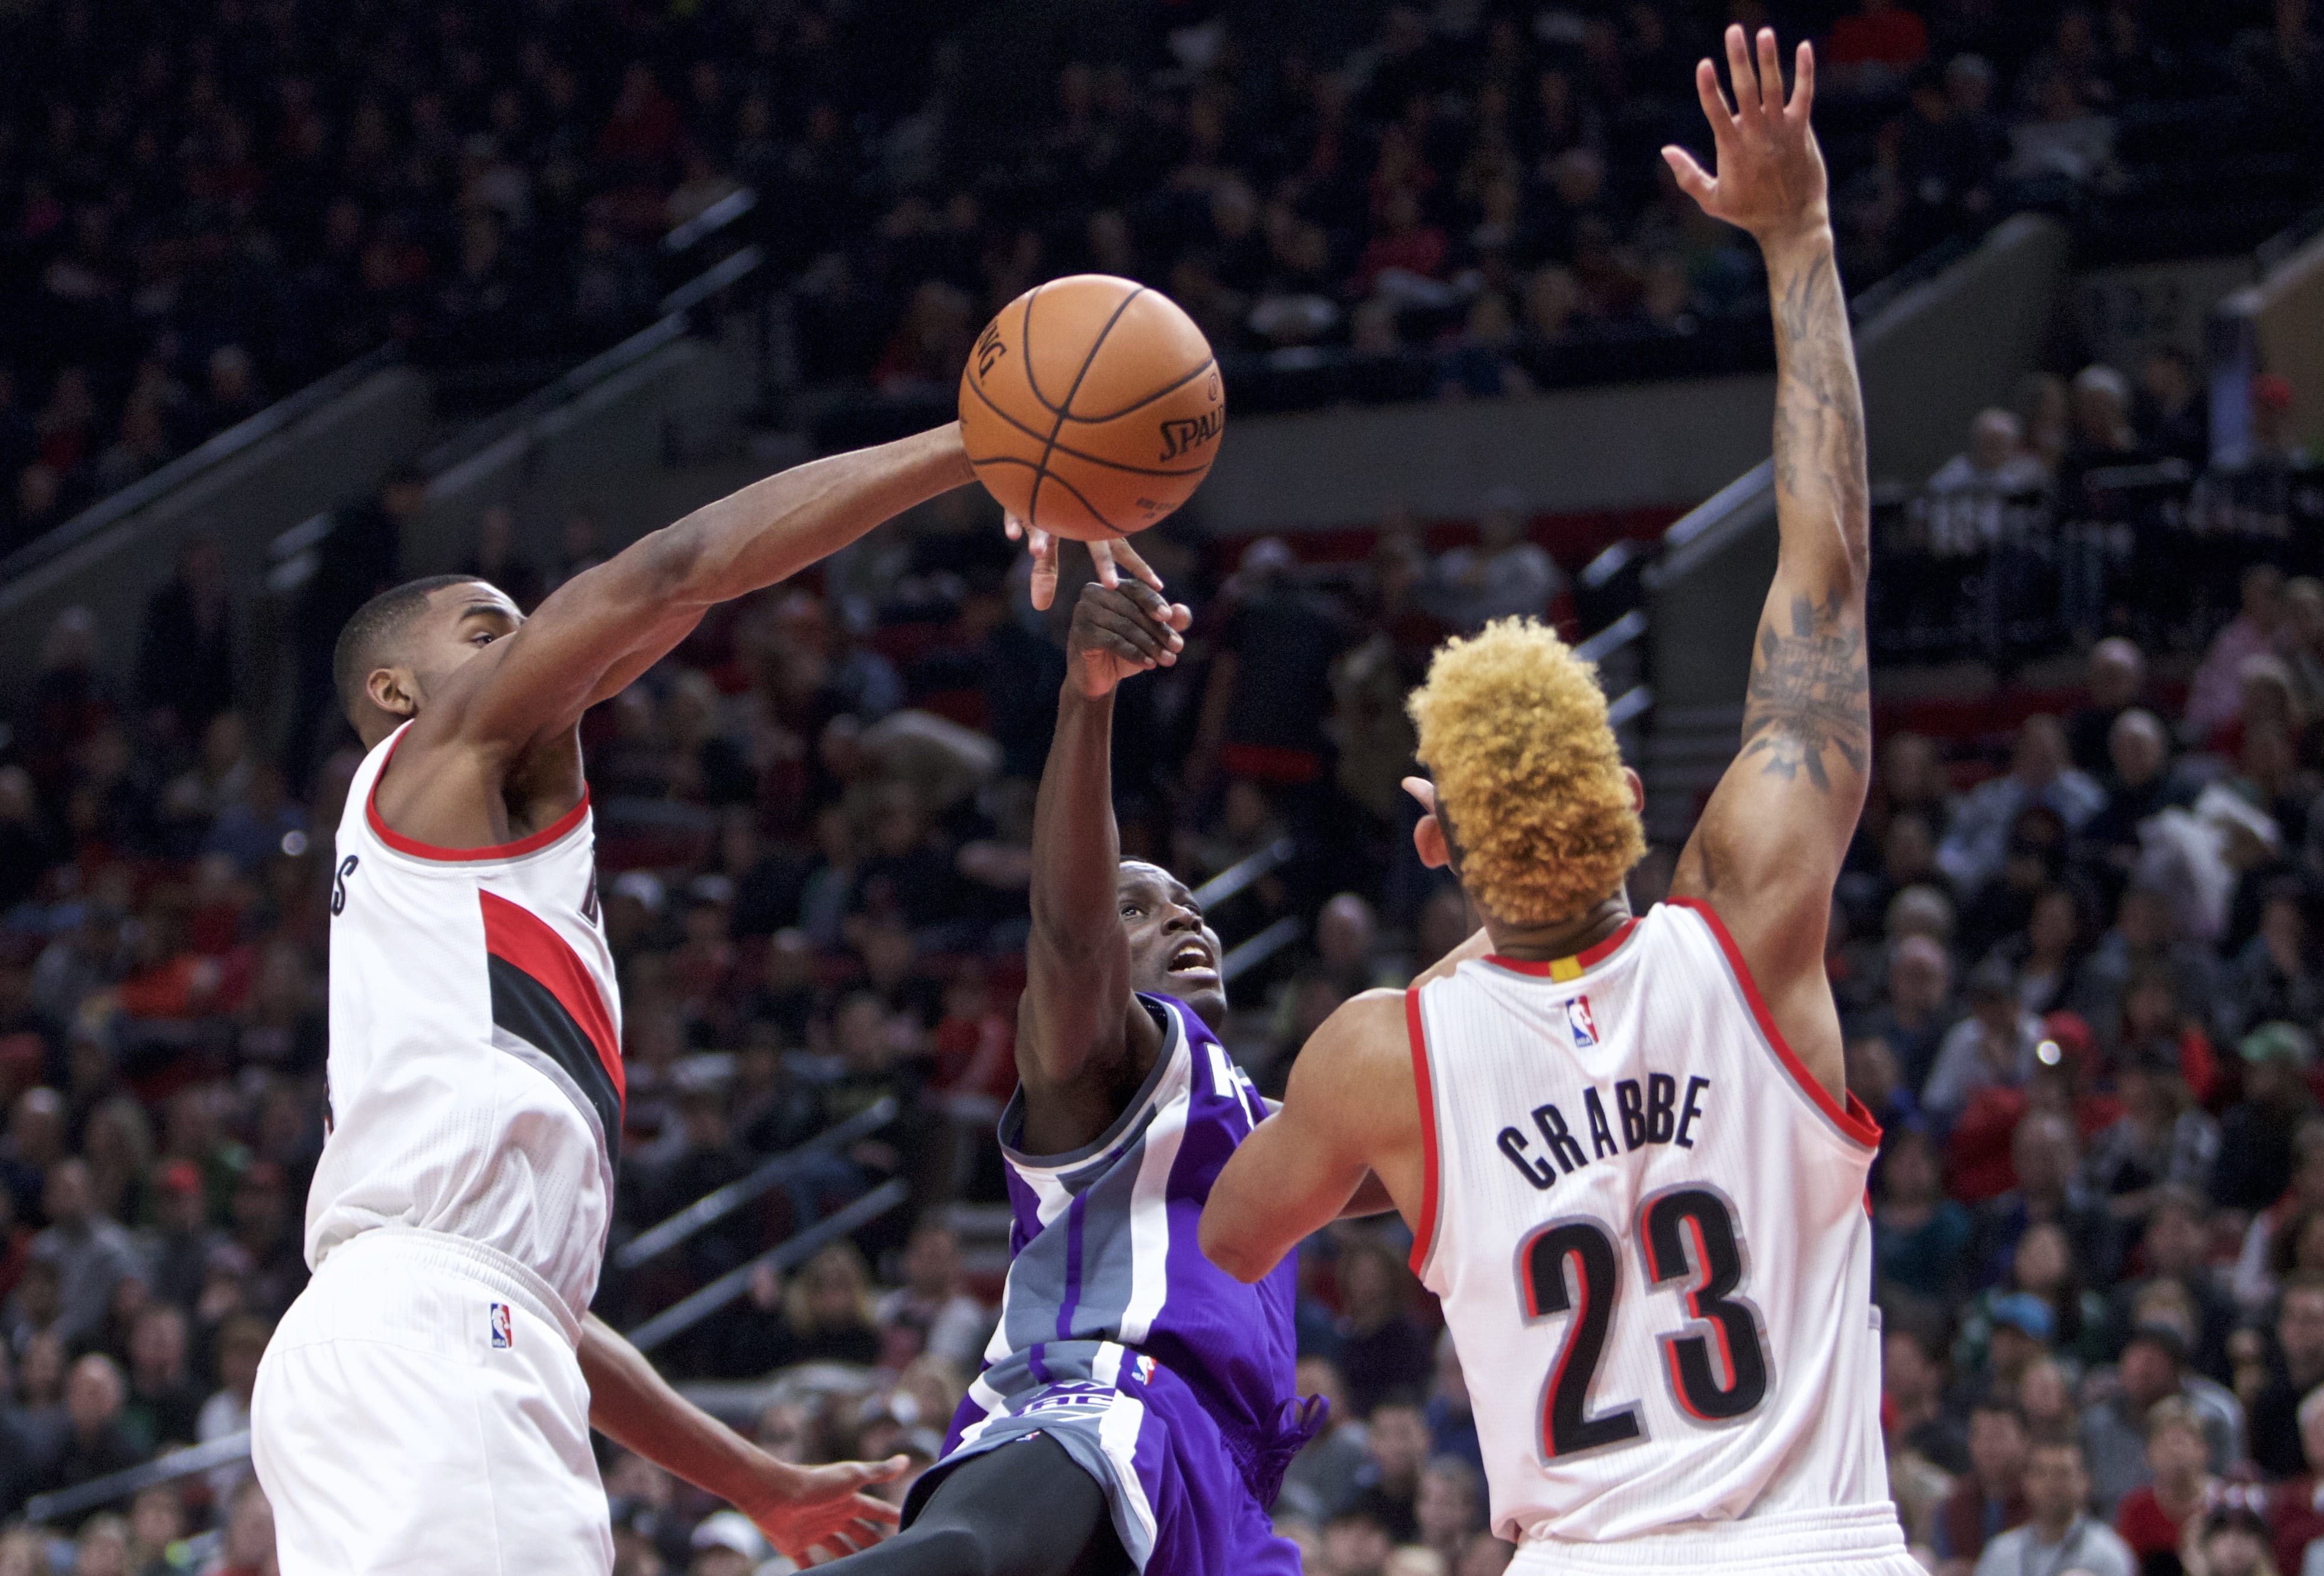 Sacramento Kings guard Darren Collison, center, has a shot knocked away by Portland Trail Blazers forward Maurice Harkless, left, as guard Allen Crabbe, right, defends during the first half of an NBA basketball game in Portland, Ore., Wednesday, Dec. 28, 2016.